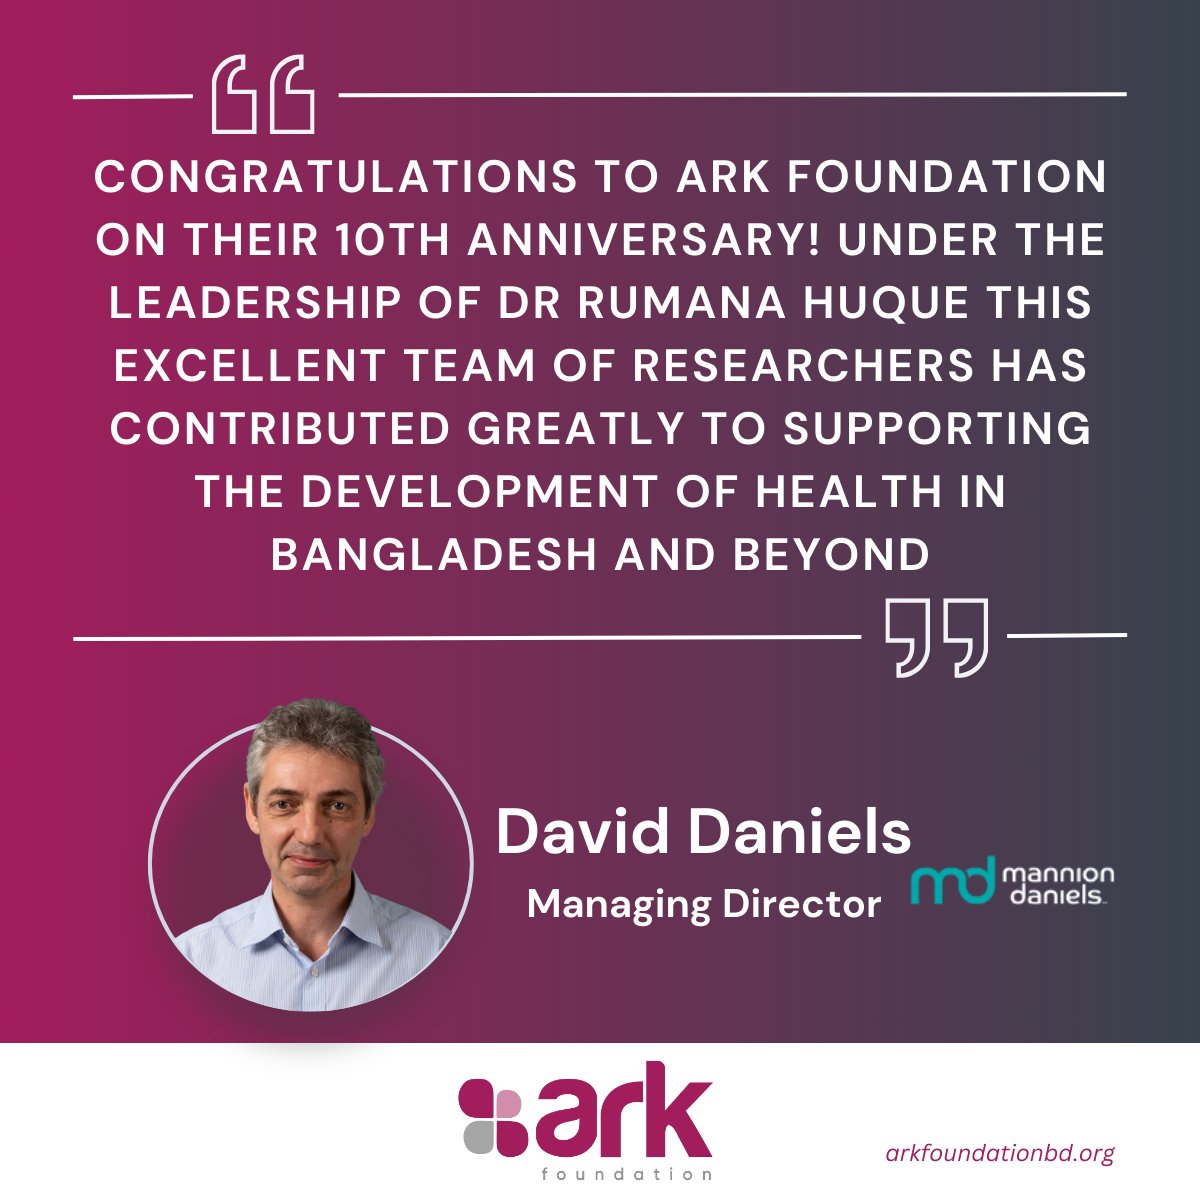 David Daniels from @MannionDaniels kindly send his regards on celebrating our 10th year. @MannionDaniels has been a trusted supporter and partner of ARK Foundation and we we wish to continue our work in development of Healthcare in 🇧🇩 & beyond. @RumanaHuque